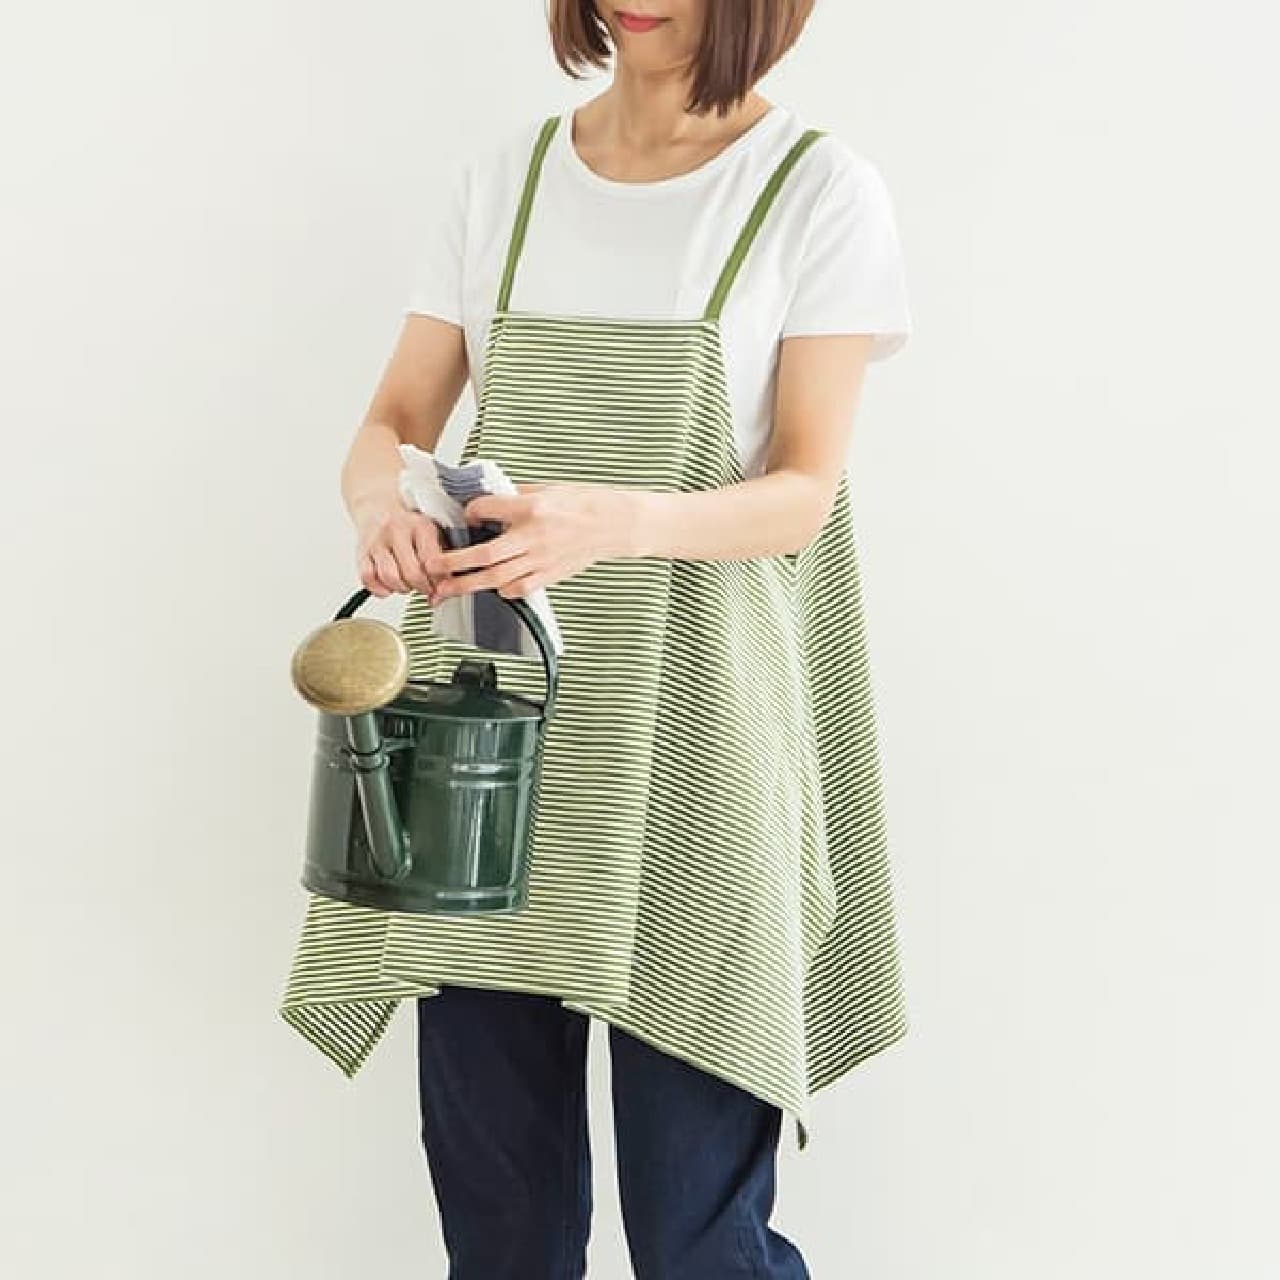 Mother's Day gifts produced by Harumi Kurihara--a wide variety of aprons, cute mittens, seasonings, etc.